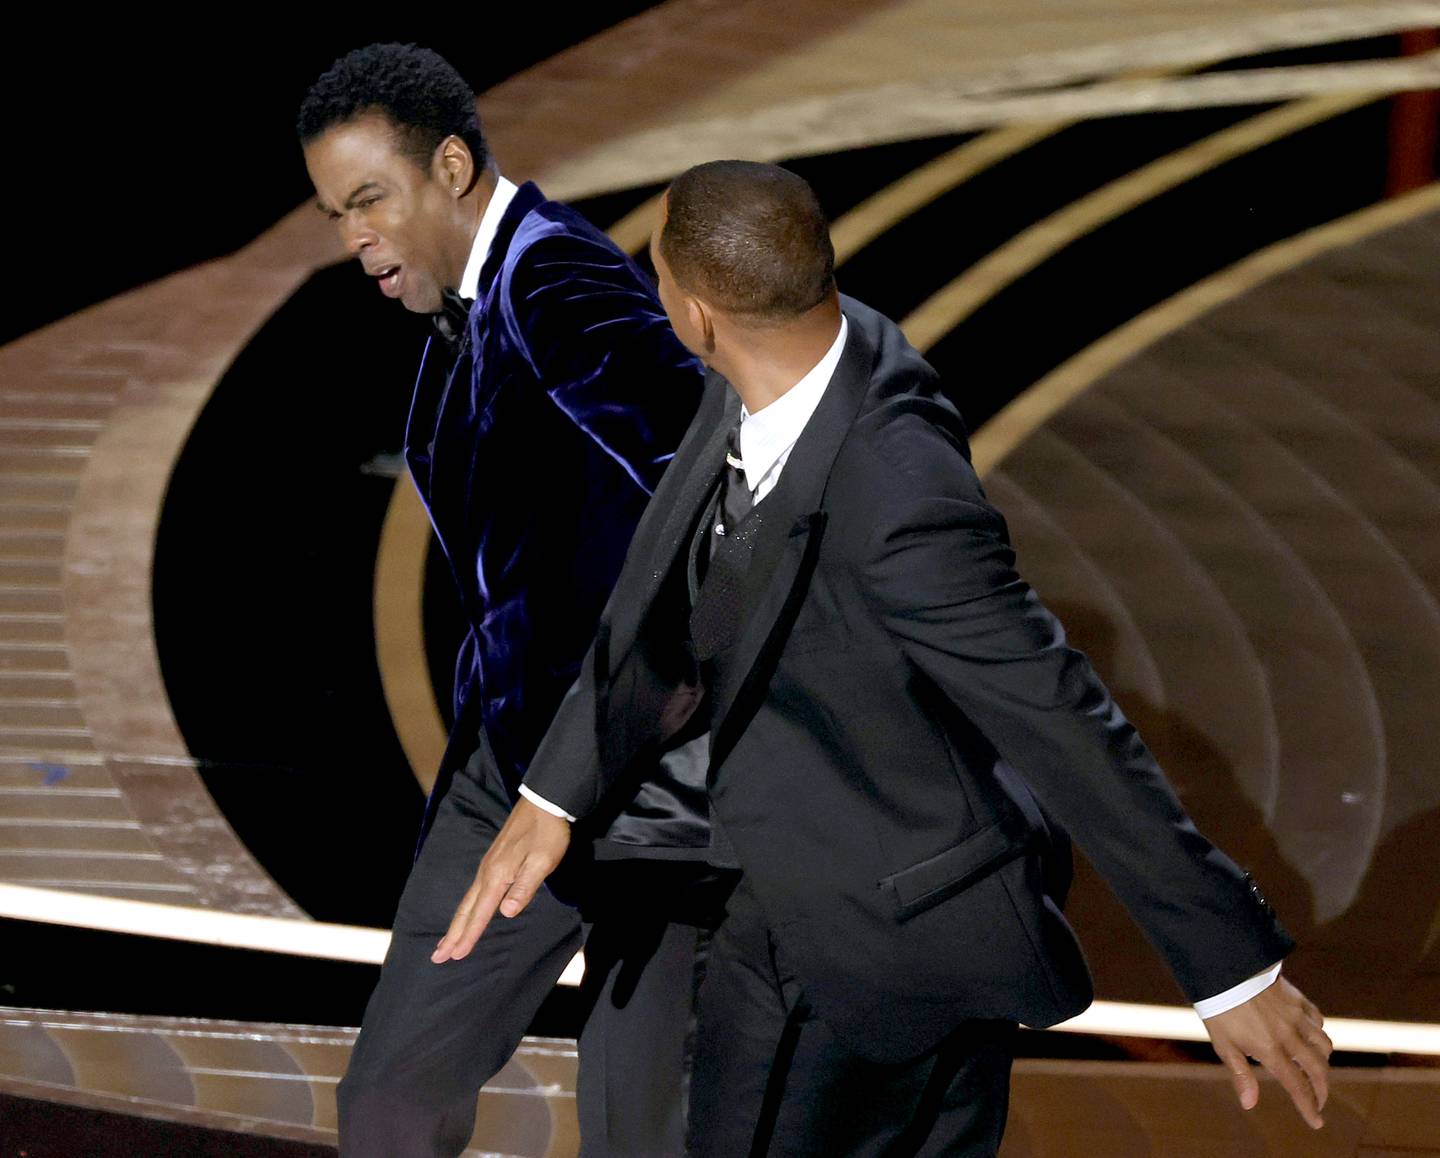 HOLLYWOOD, CALIFORNIA - MARCH 27: Will Smith appears to slap Chris Rock onstage during the 94th Annual Academy Awards at Dolby Theatre on March 27, 2022 in Hollywood, California.